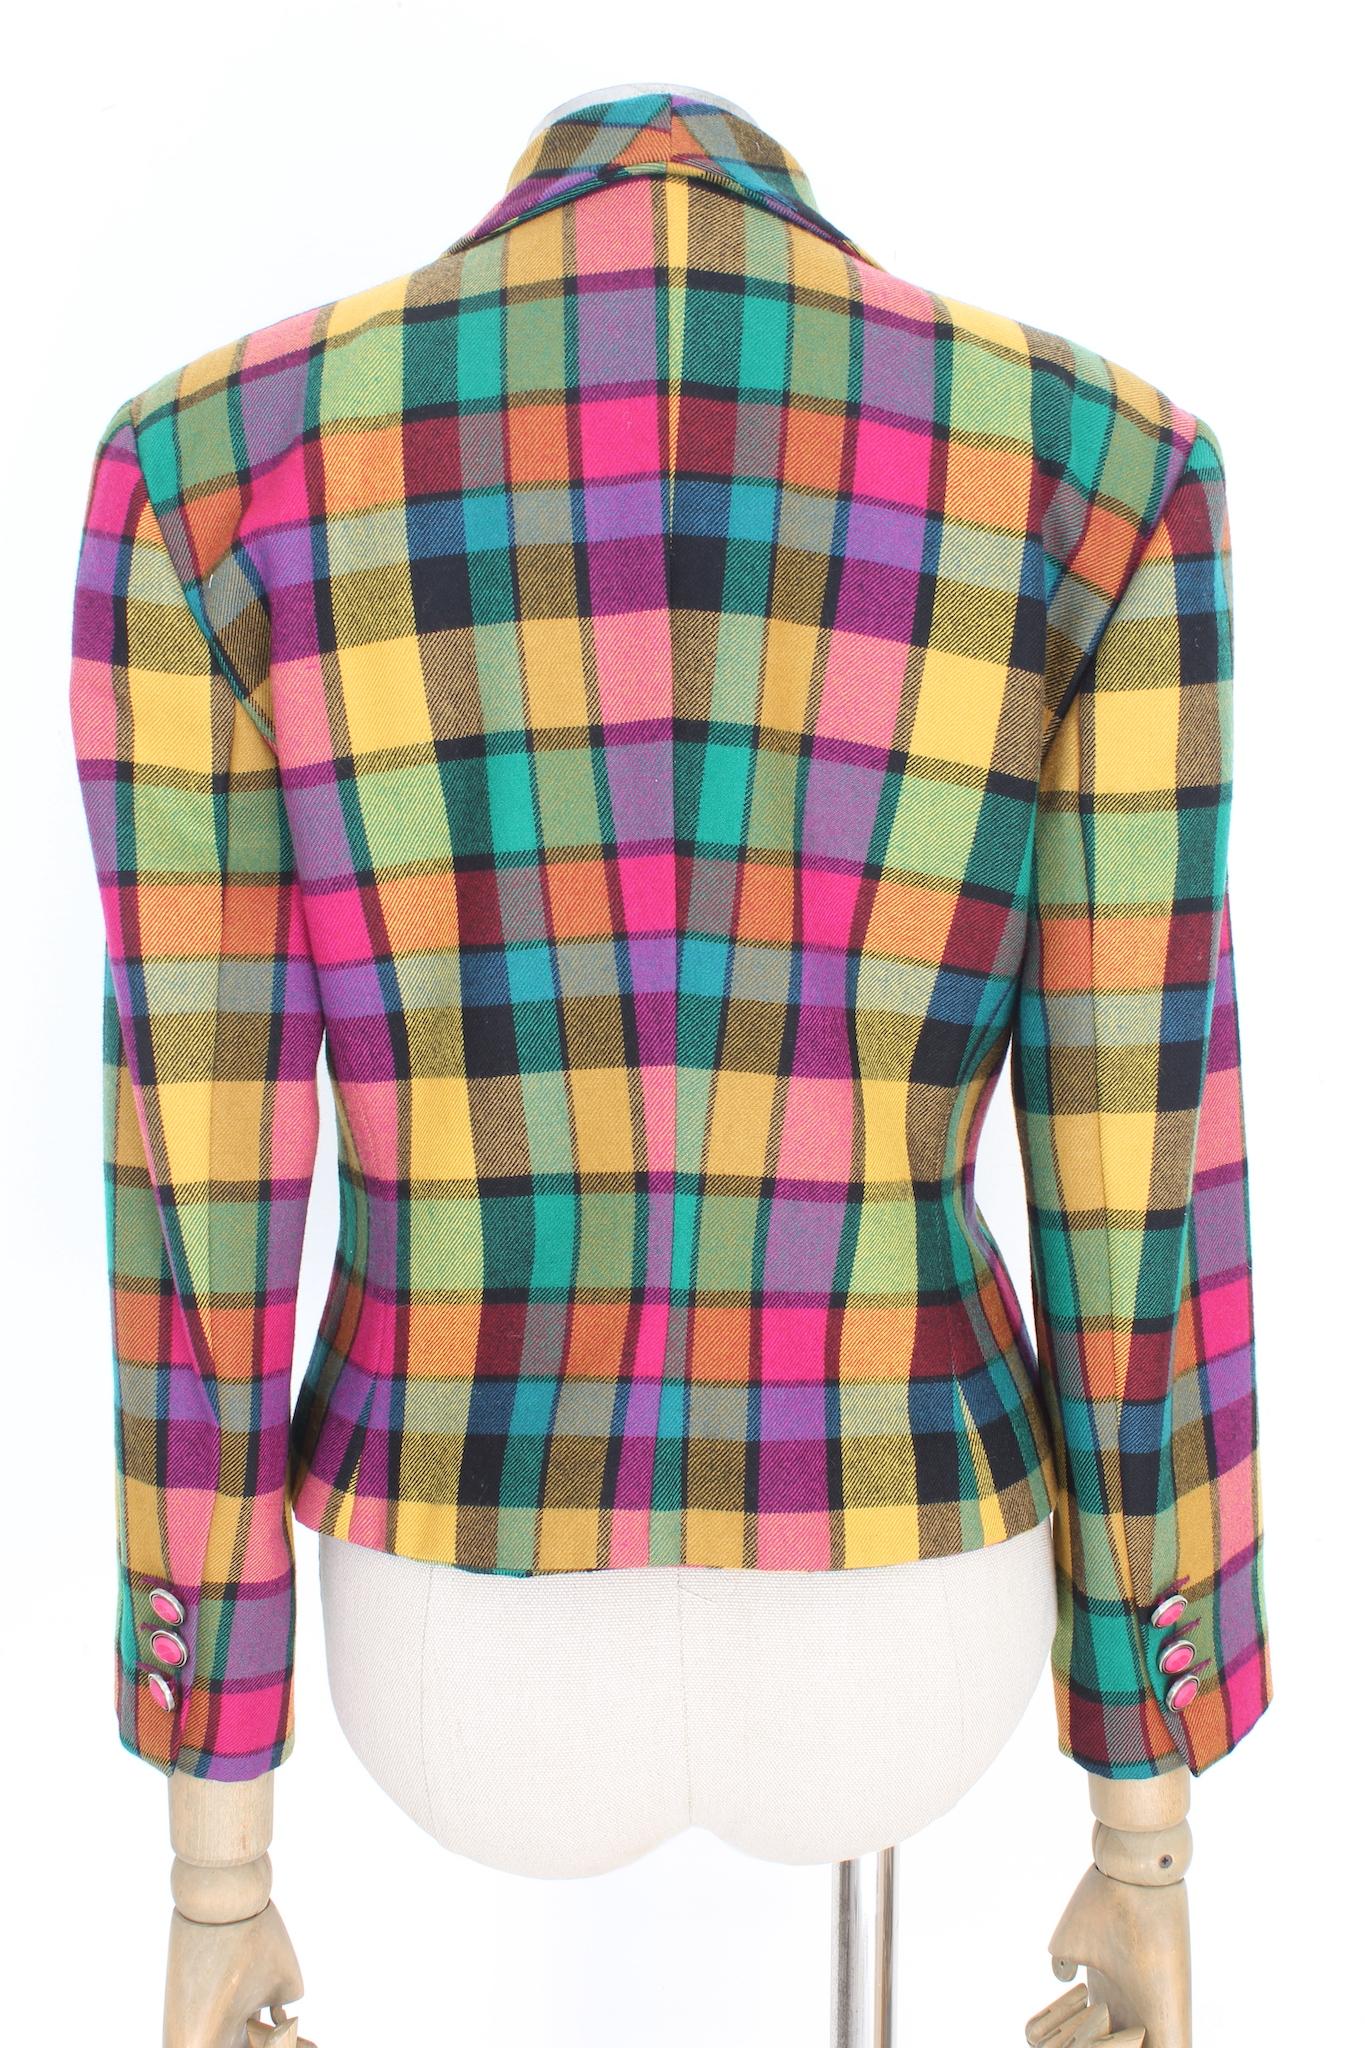 Versus by Gianni Versace short vintage 90s jacket. Fuchsia, yellow and green color with checked pattern. Closure with fuchsia colored buttons both at the waist and on the sleeves. 100% wool fabric, internally lined. Made in Italy.

Size: 42 It 8 Us